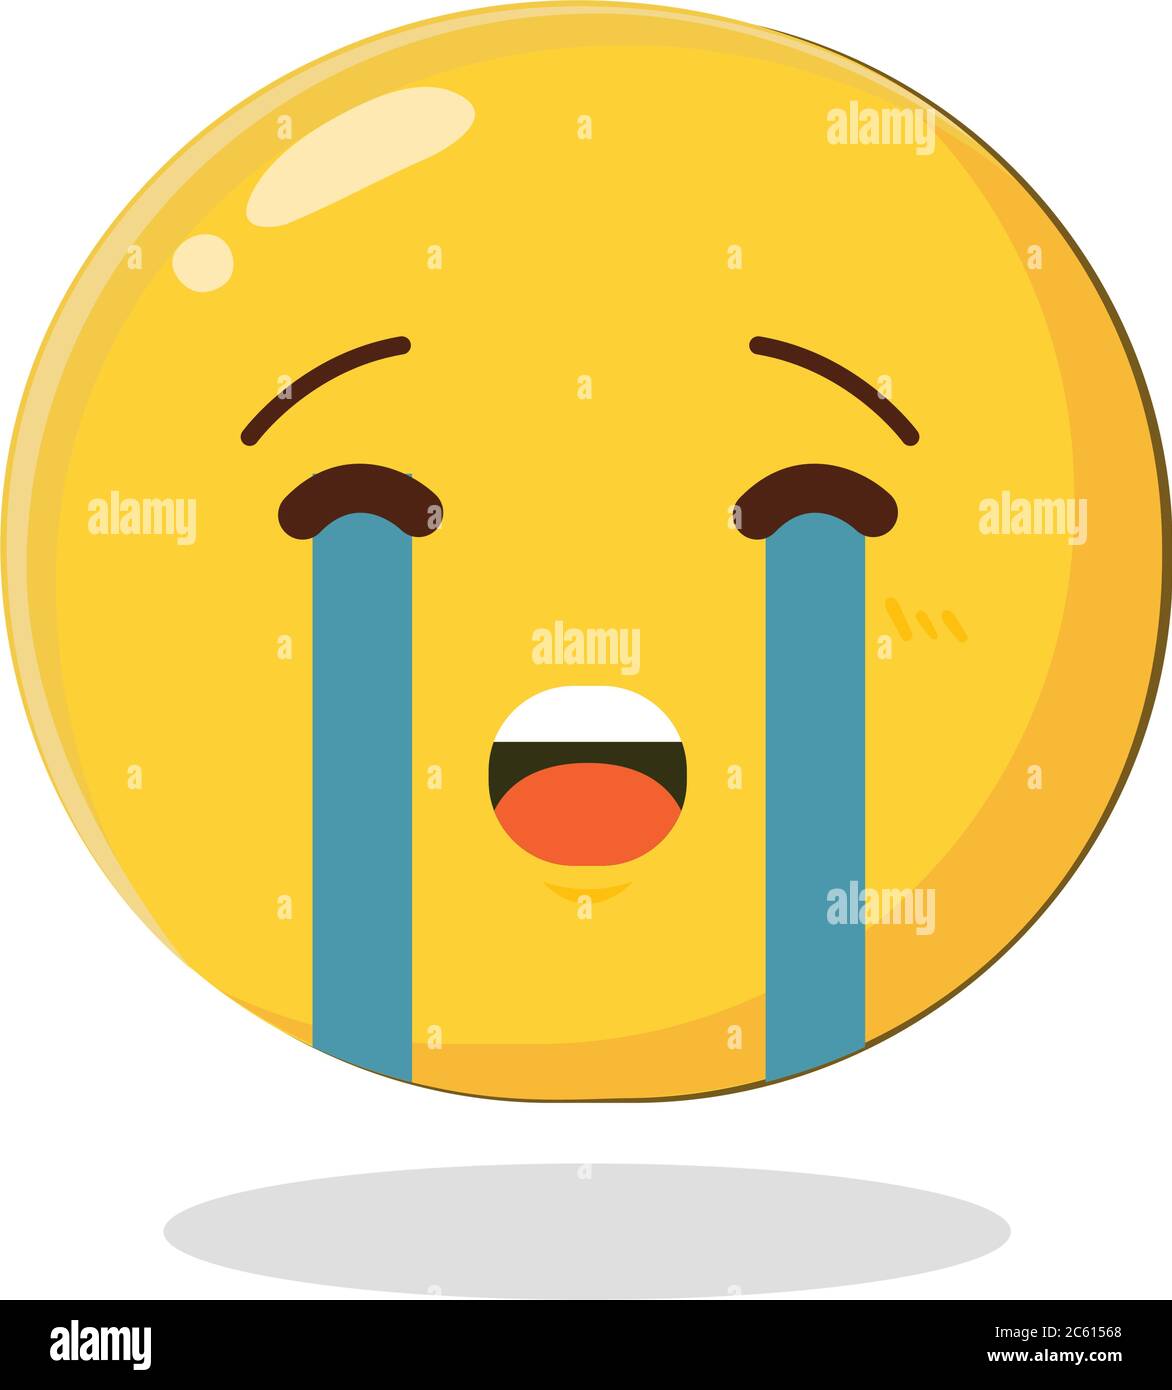 Yellow emoticon unhappy face with crying tear icon. Cartoon Isolated ...